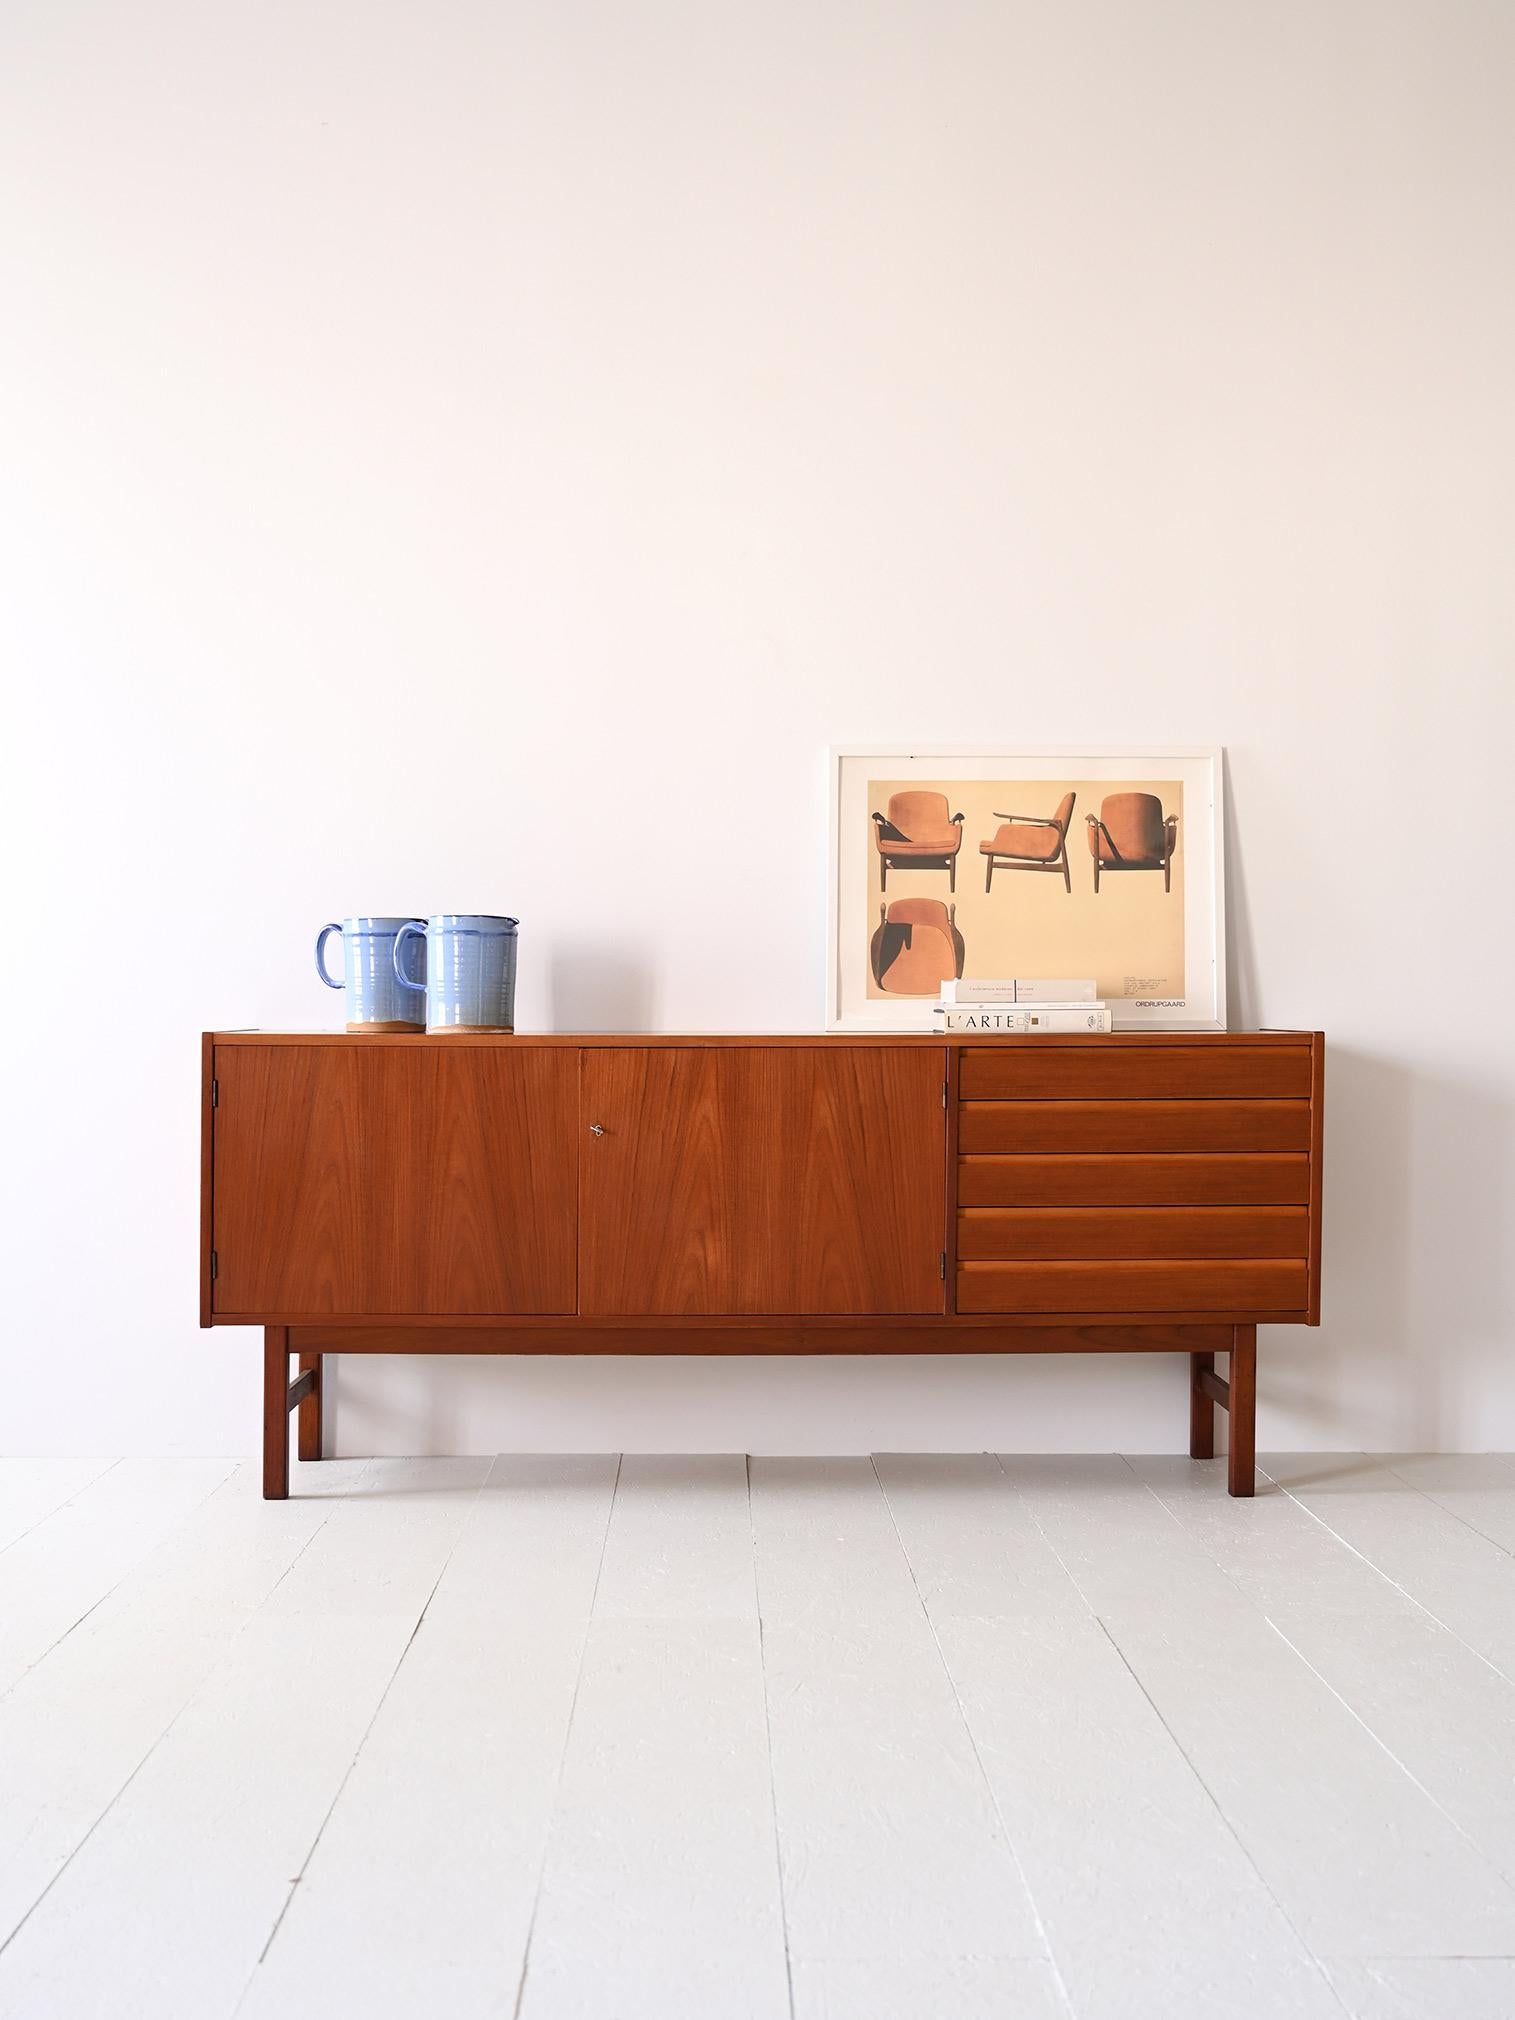 1960s sideboard designed by Erik Worts for Ikea.

A Swedish modern antique furniture piece in excellent condition that traces mid-century taste and style.
Formed by a frame with clean and minimal lines, it features 5 drawers with a hidden handle and